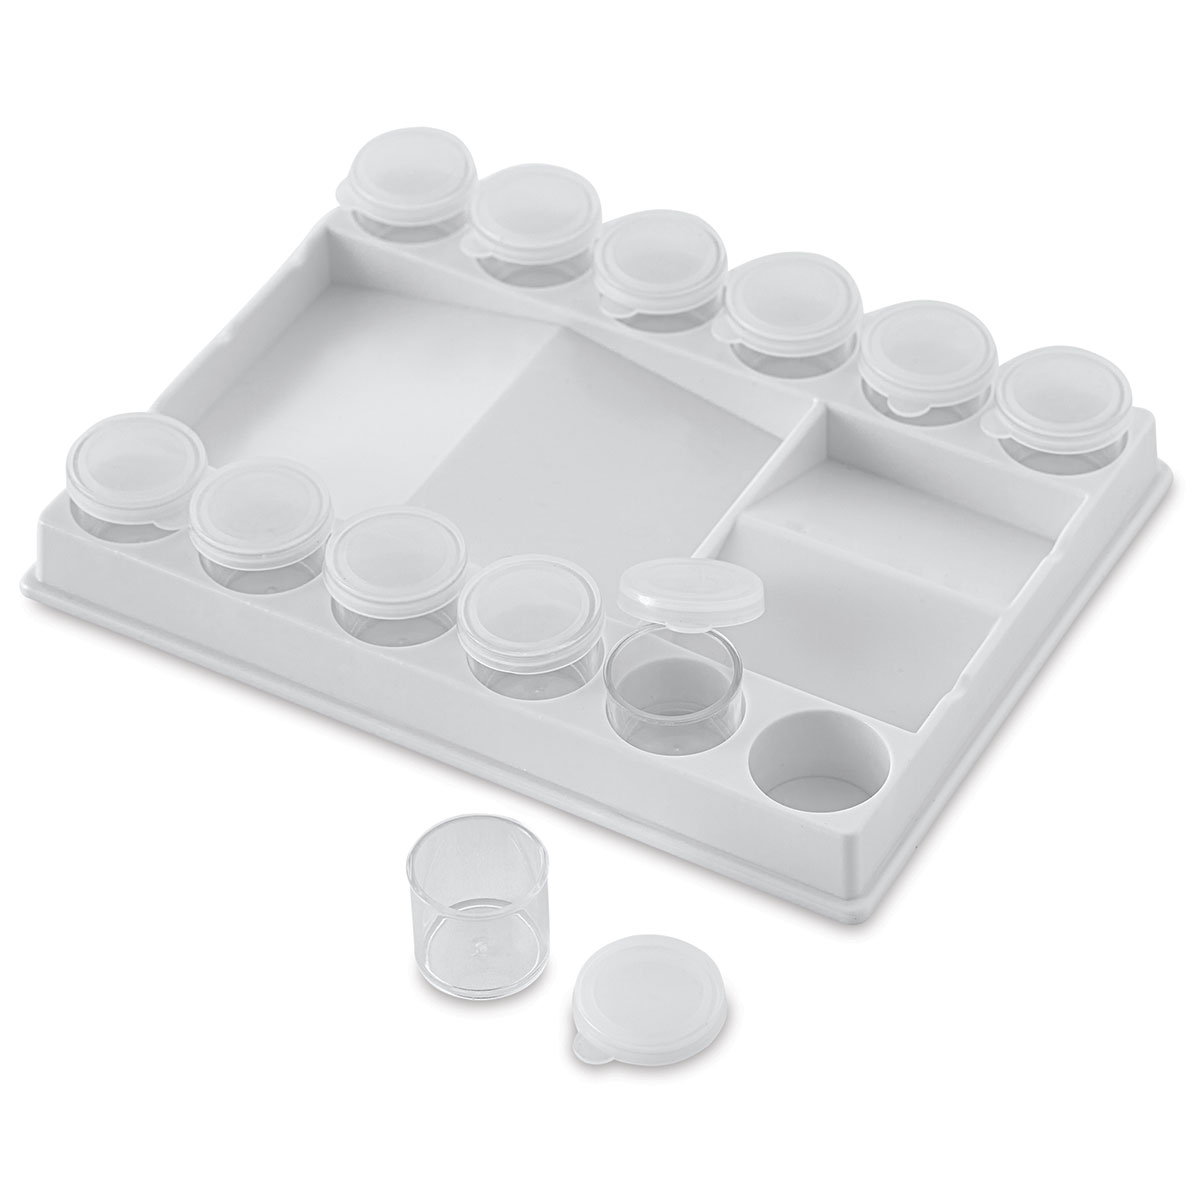 DecorRack 12 Plastic Mini Containers with Lids, 1oz, Macao